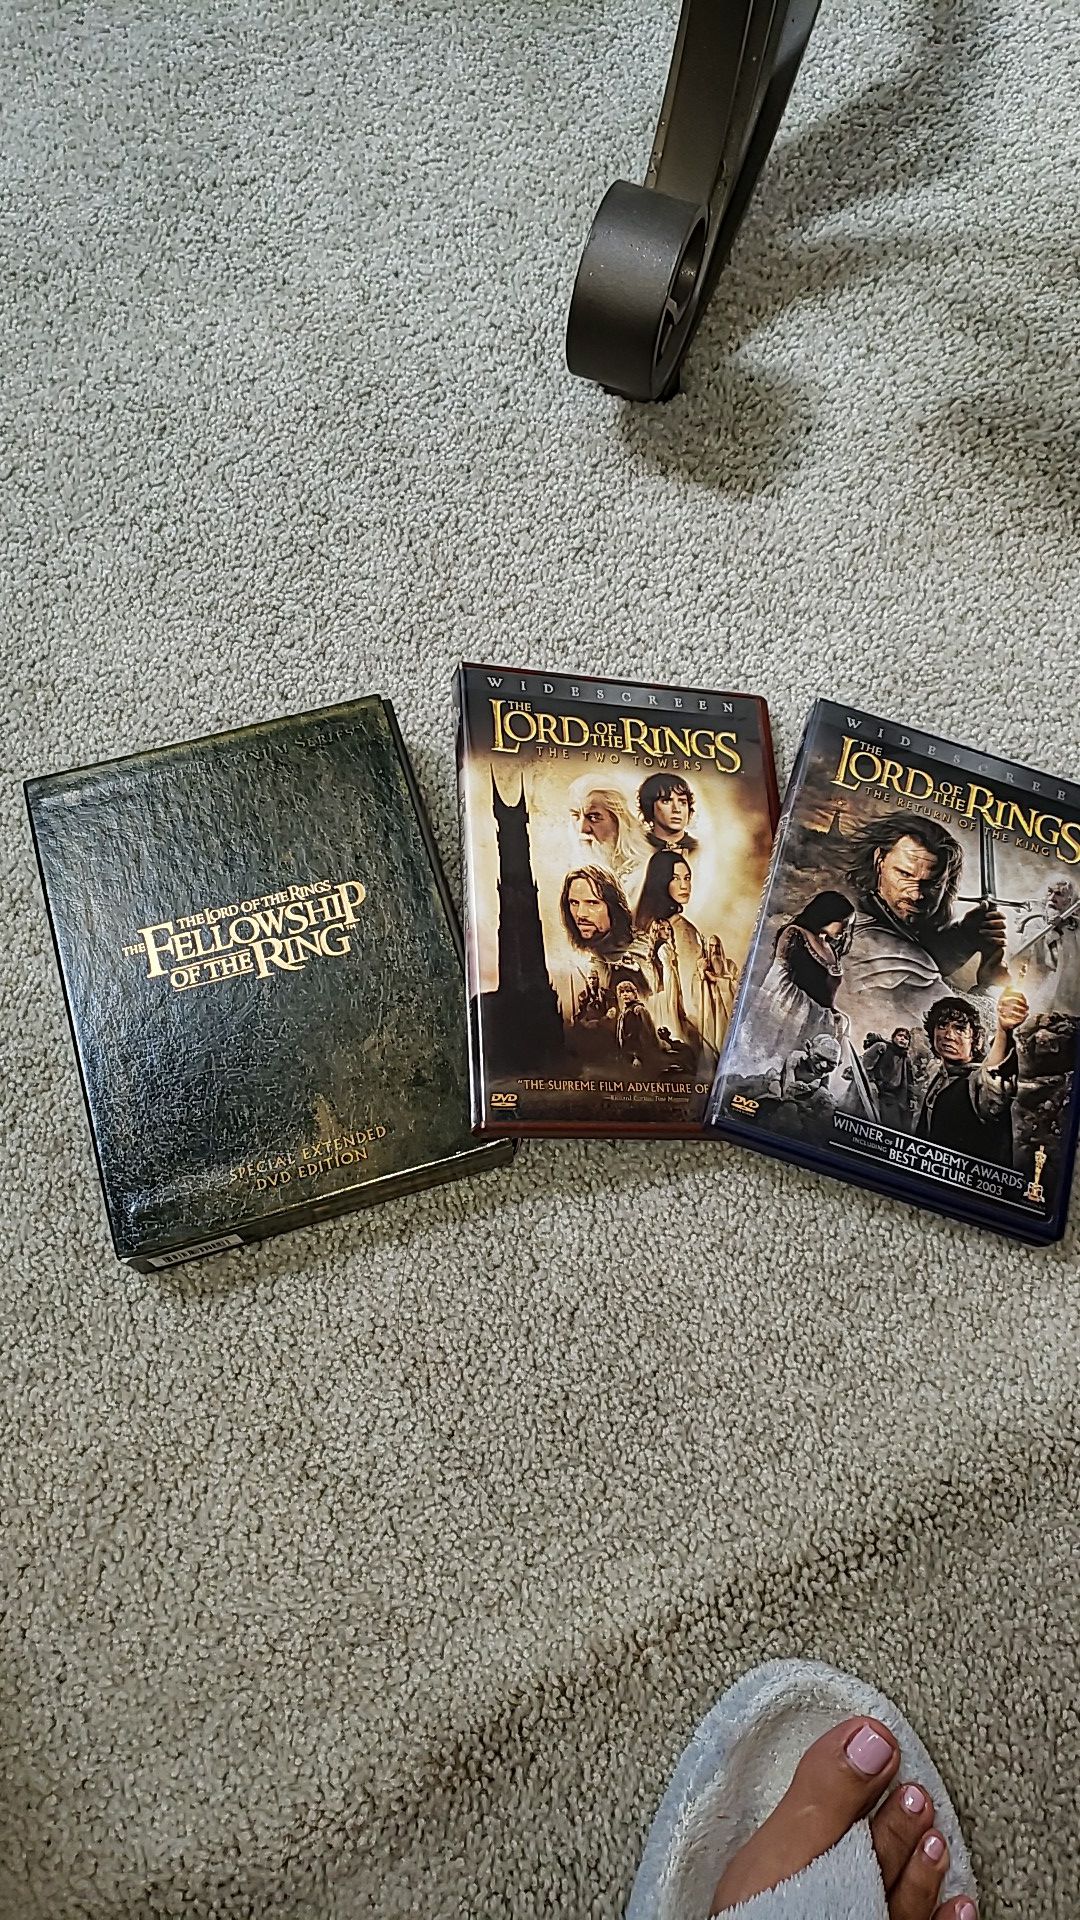 The Lord Of The Rings DVD set